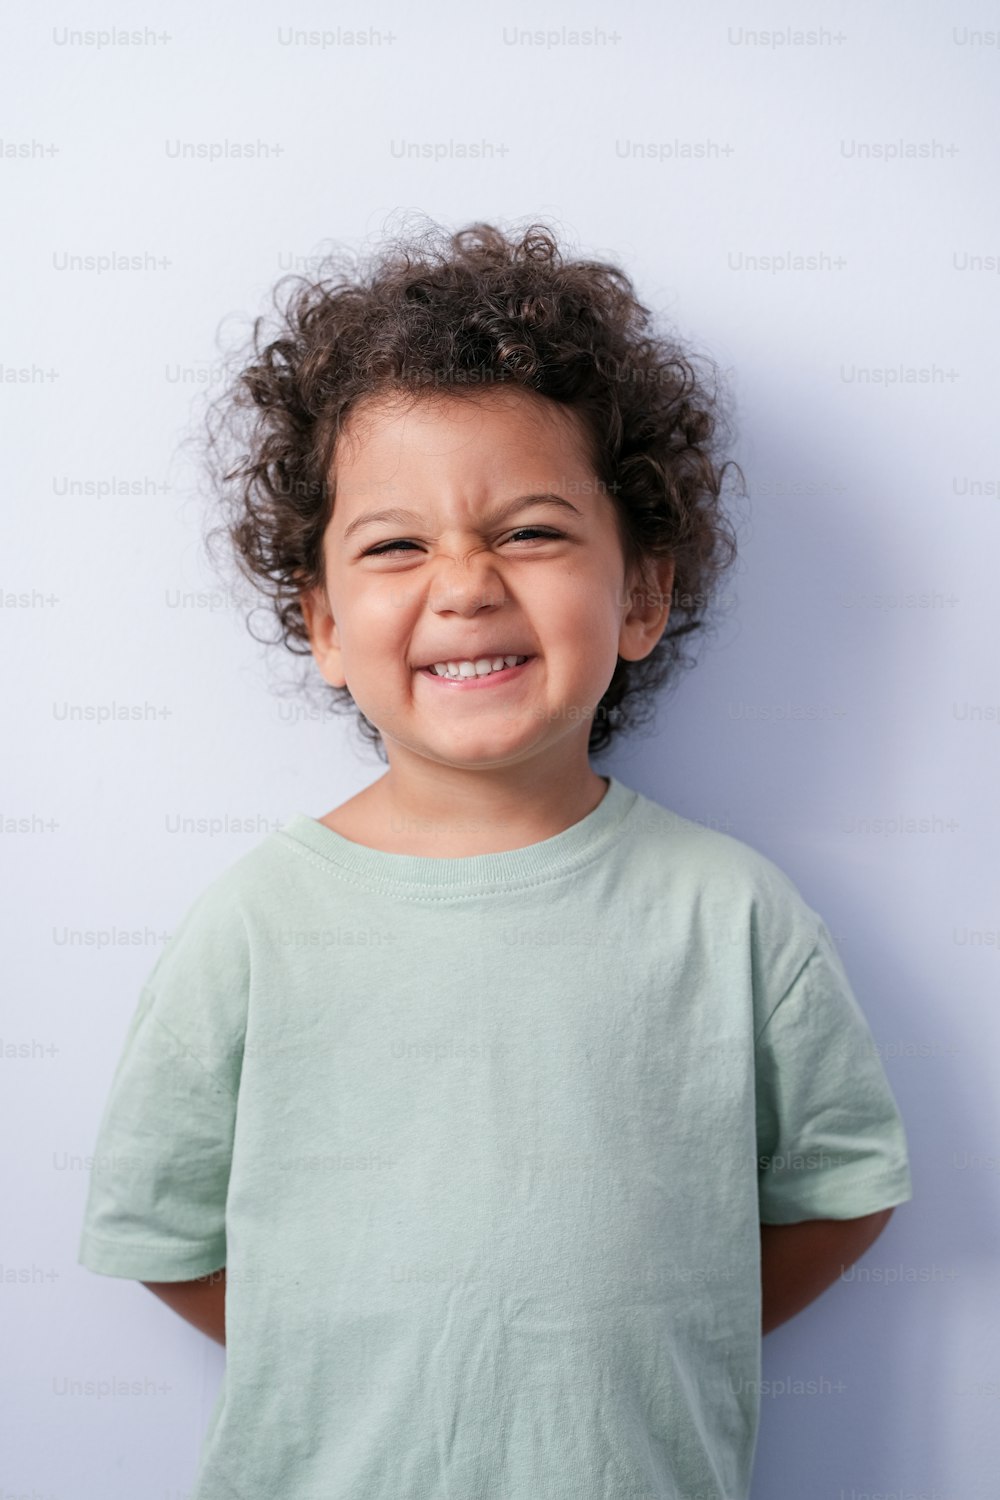 a young child with curly hair is smiling